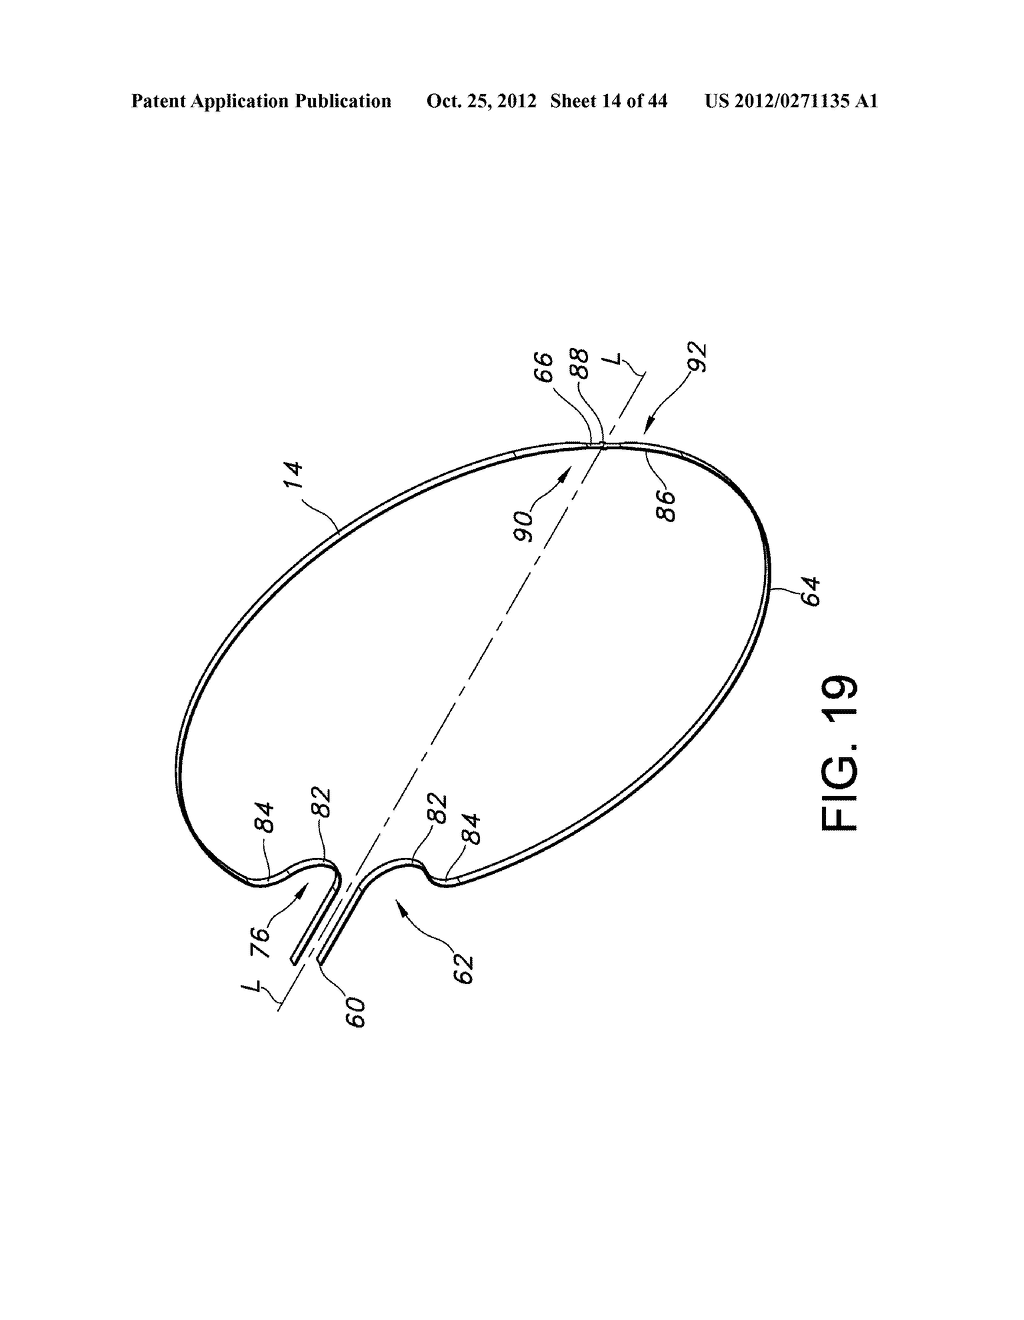 FLEXIBLE ELECTRODE ASSEMBLY FOR INSERTION INTO BODY LUMEN OR ORGAN - diagram, schematic, and image 15